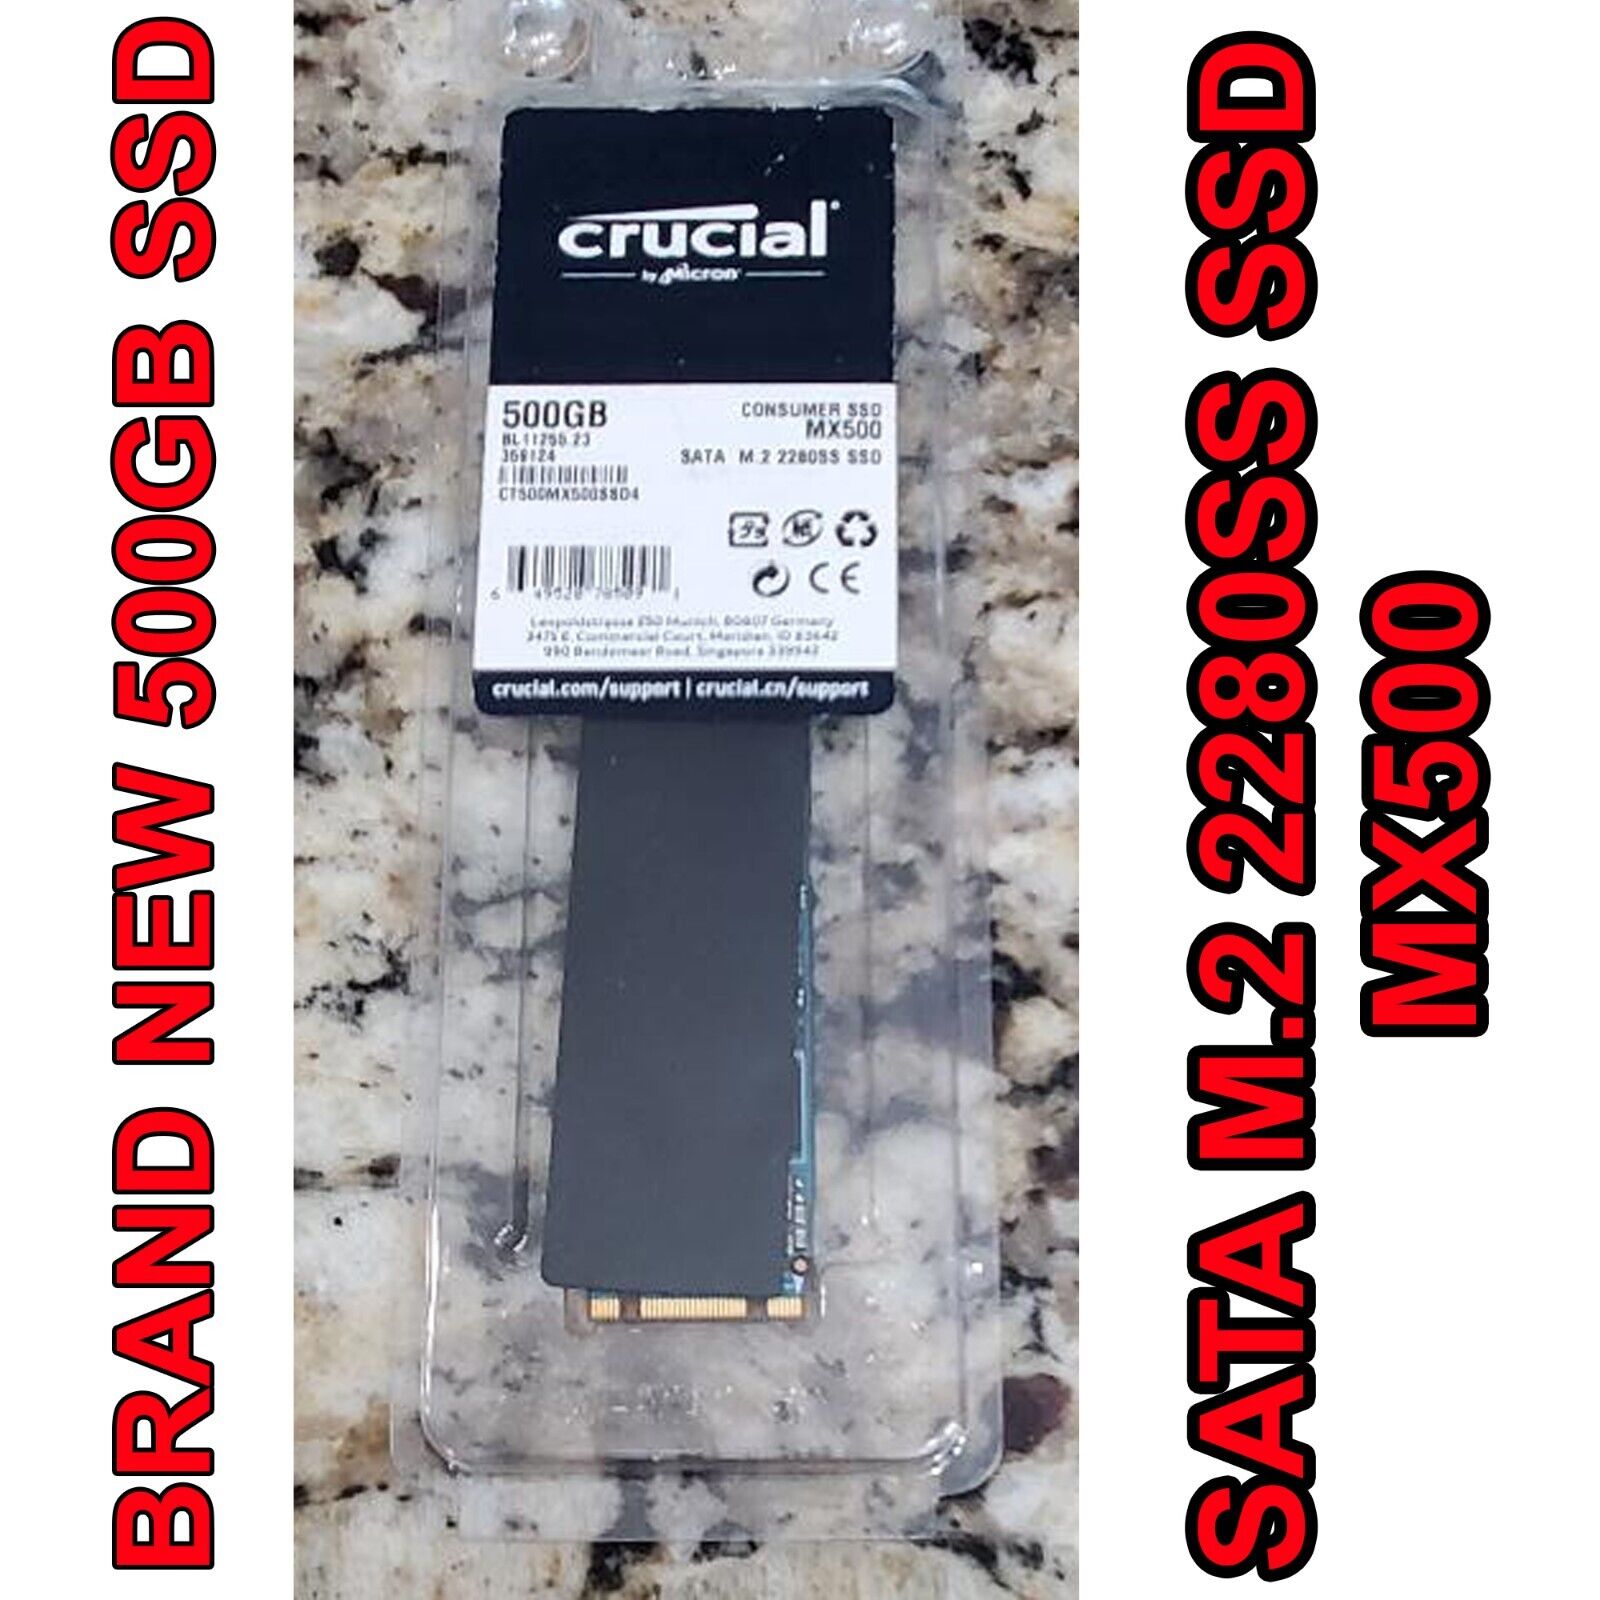 Crucial by Micron mx500 500gb SATA m.2 2280ss SSD Solid Drive NEW